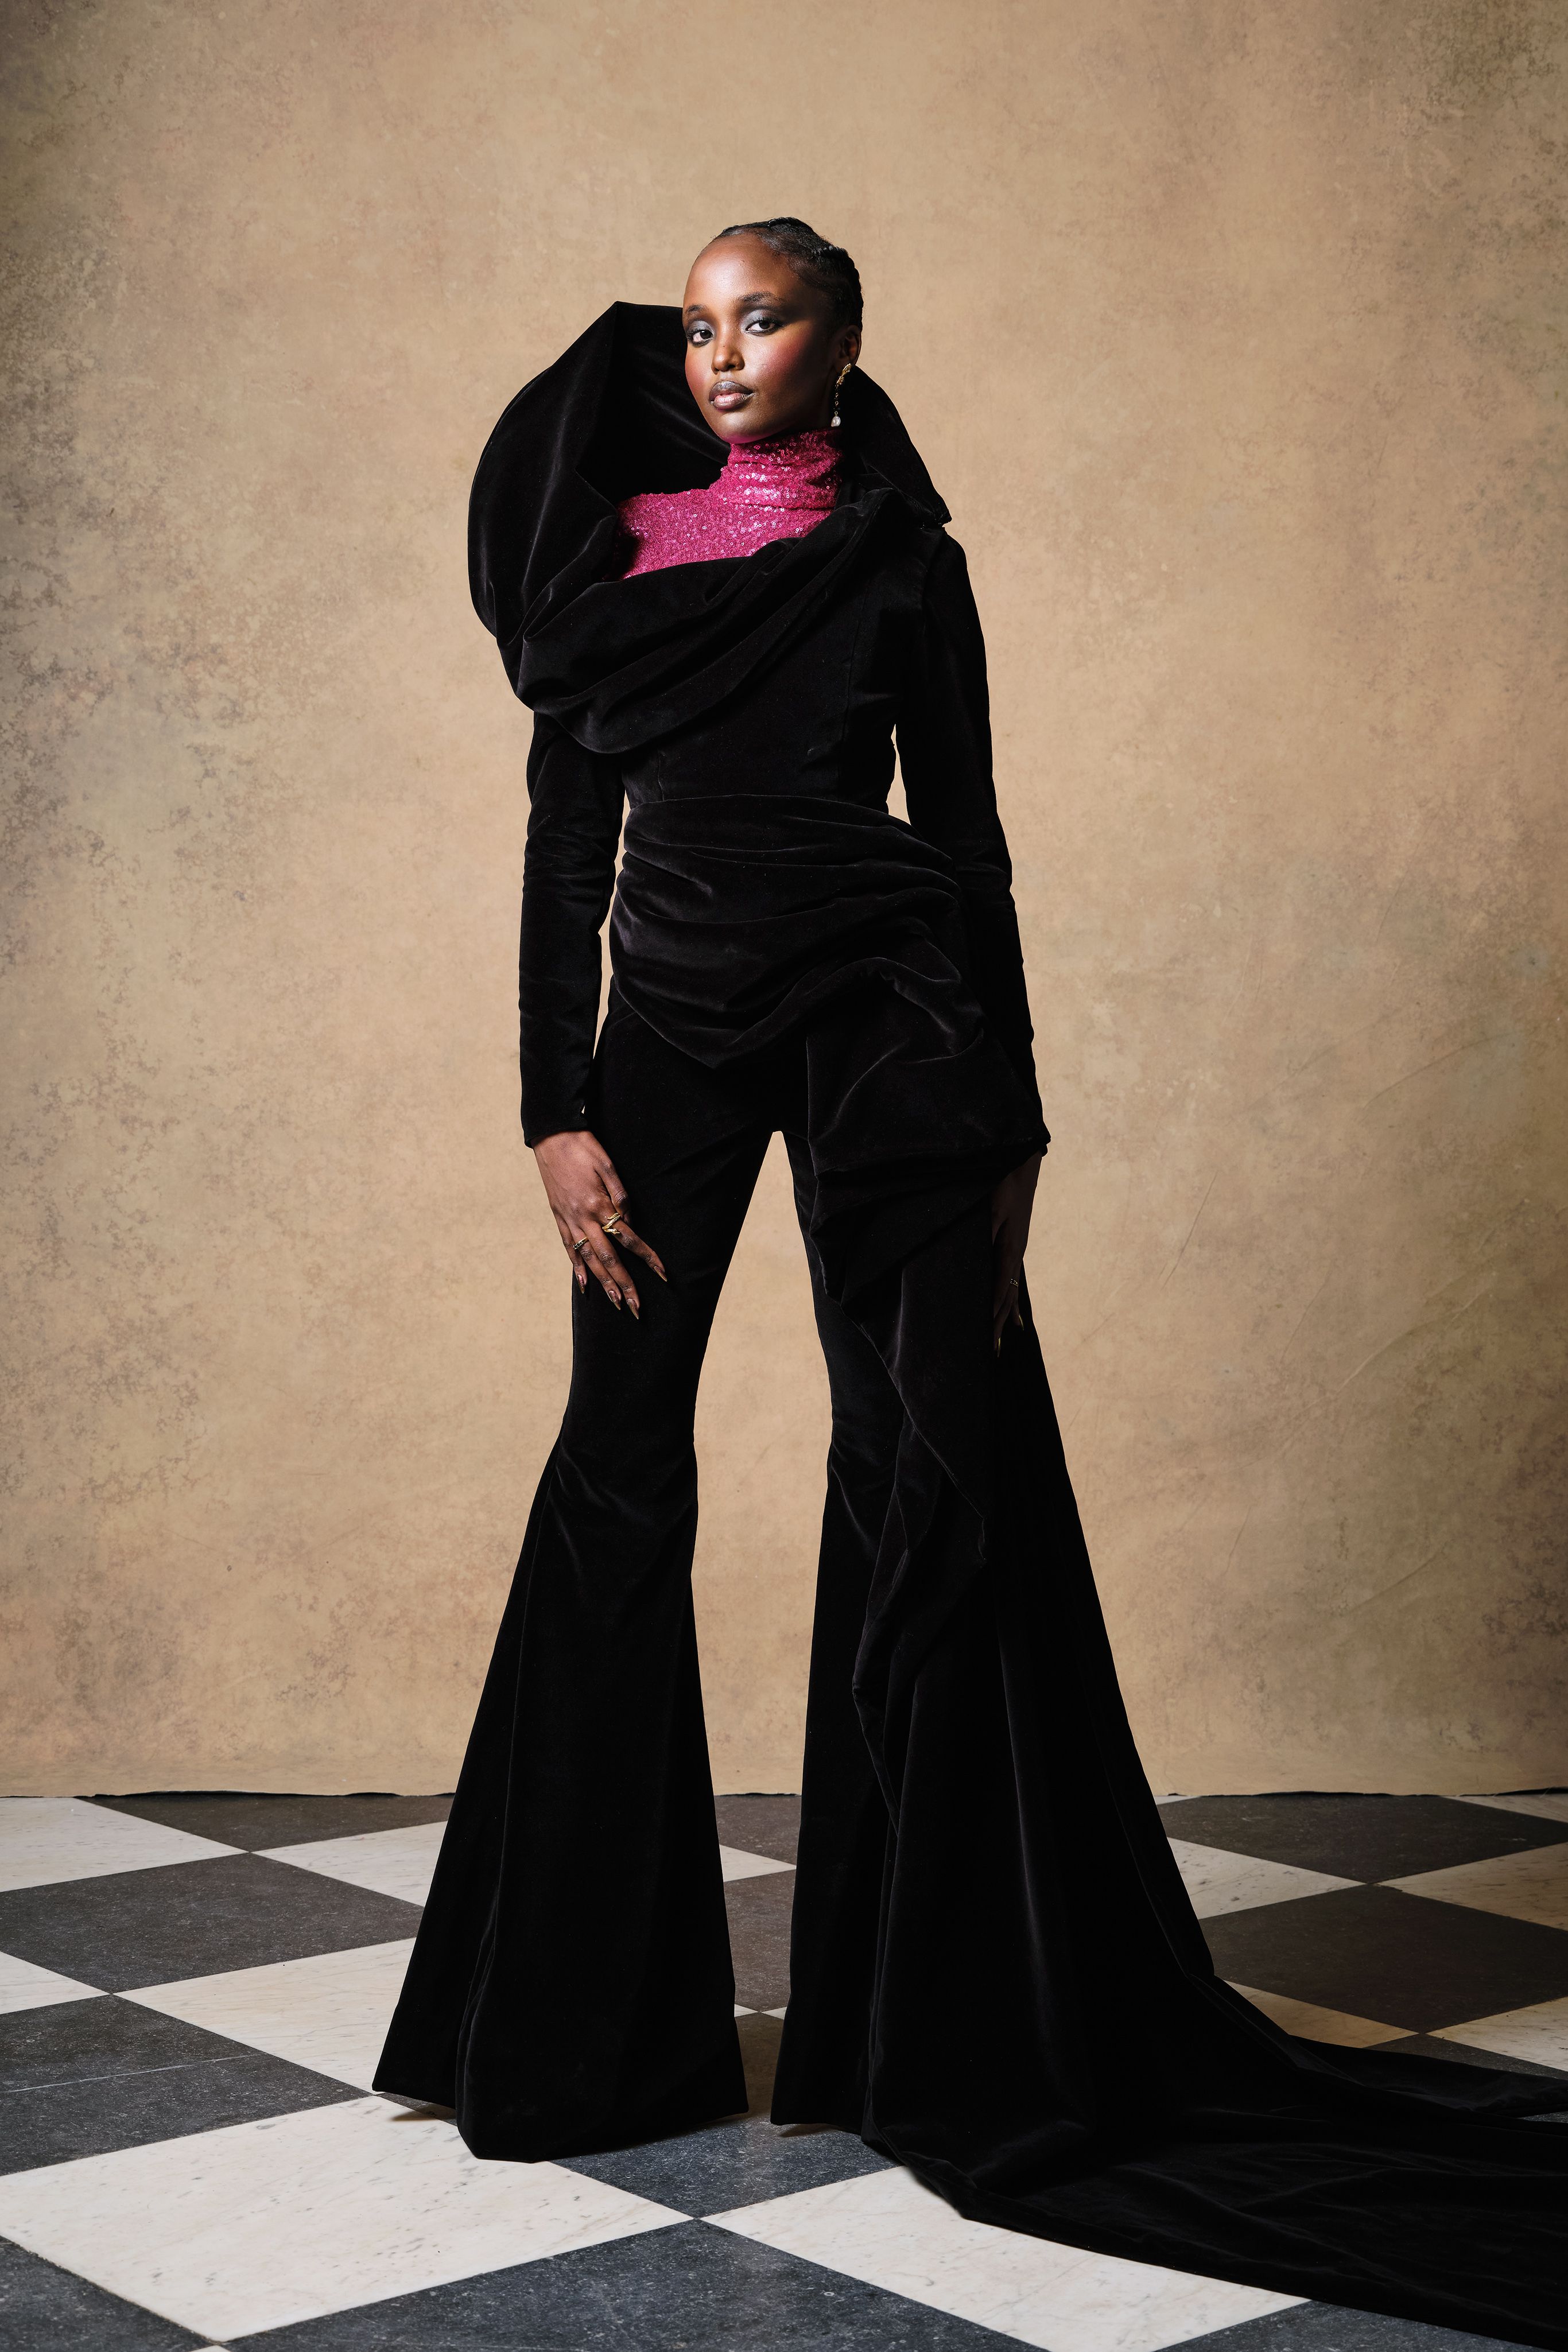 New work exclusively for @modernluxury @heriethpaul wears the graphic and  the bold noir looks of the season for “Shape…